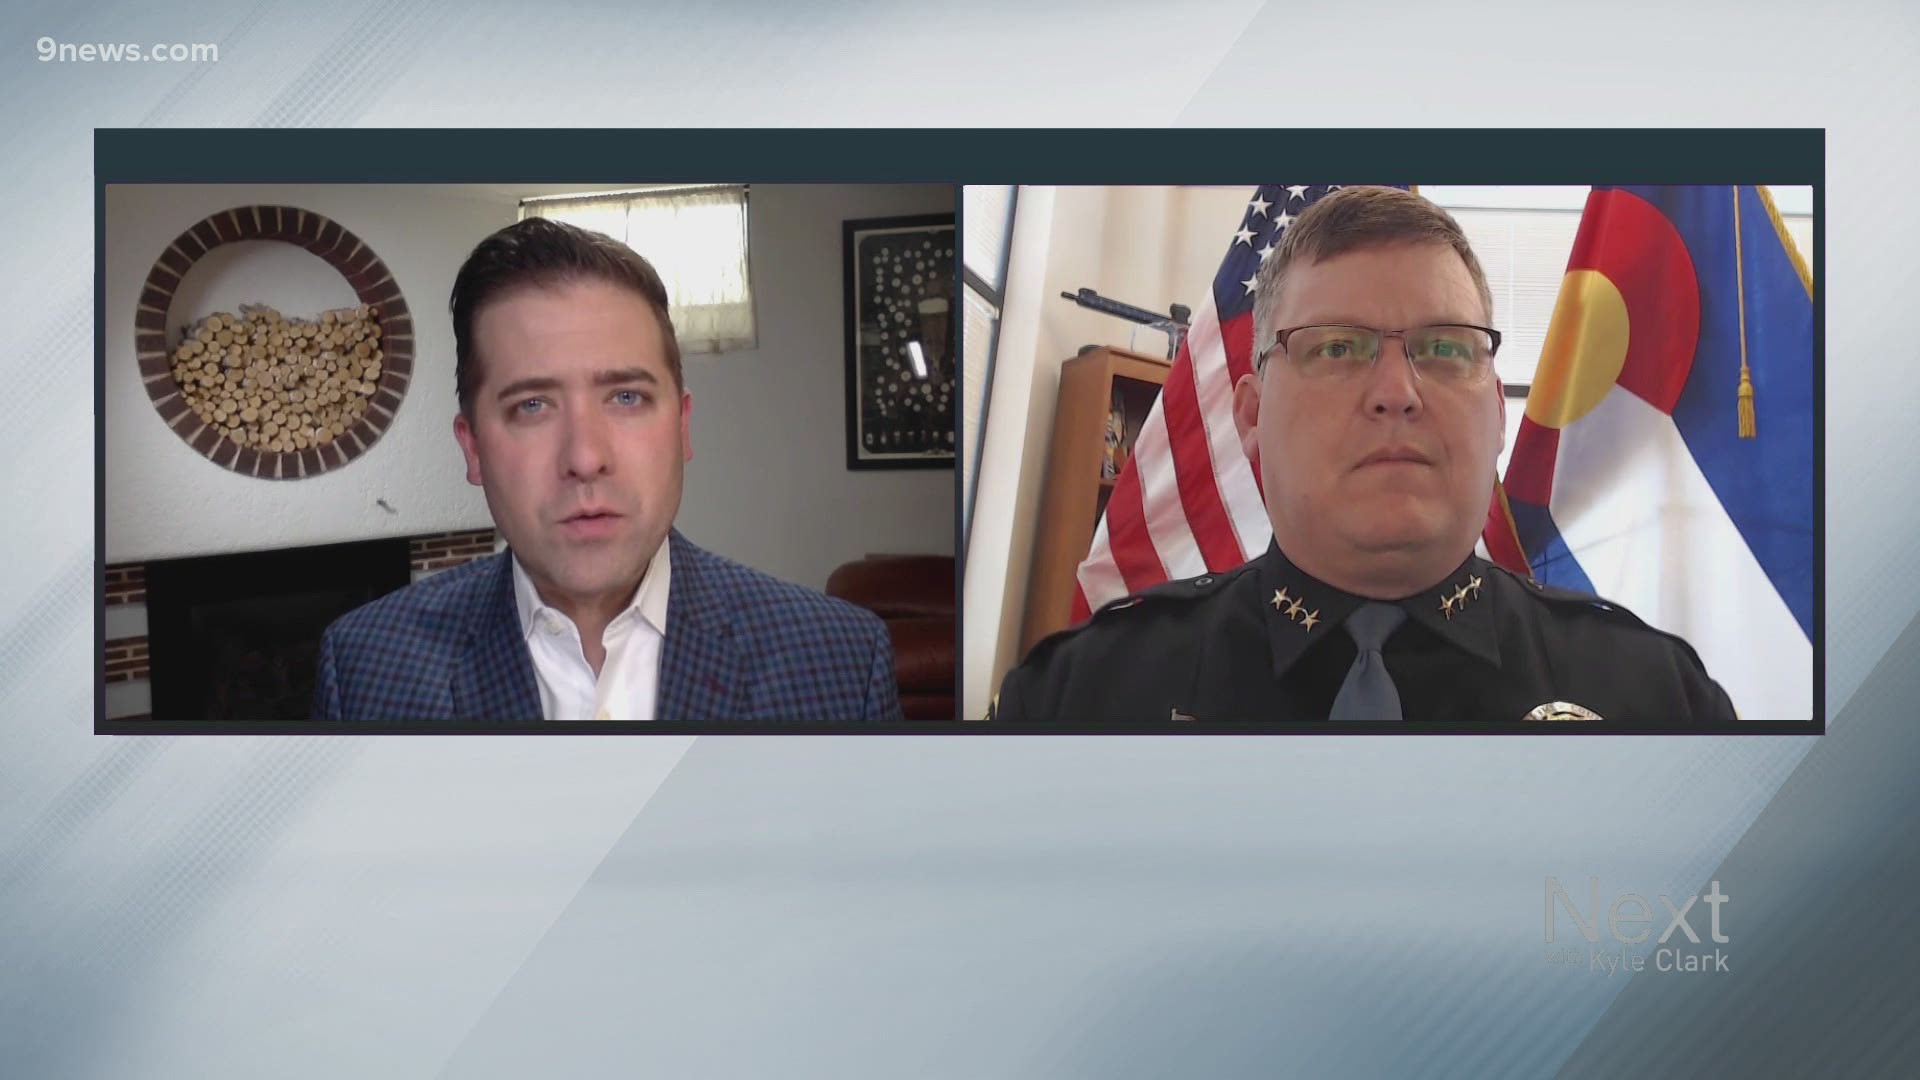 Sheriff Justin Smith opposes the bill, particularly law enforcement officers losing qualified immunity. He says it will lead to more danger in local communities.